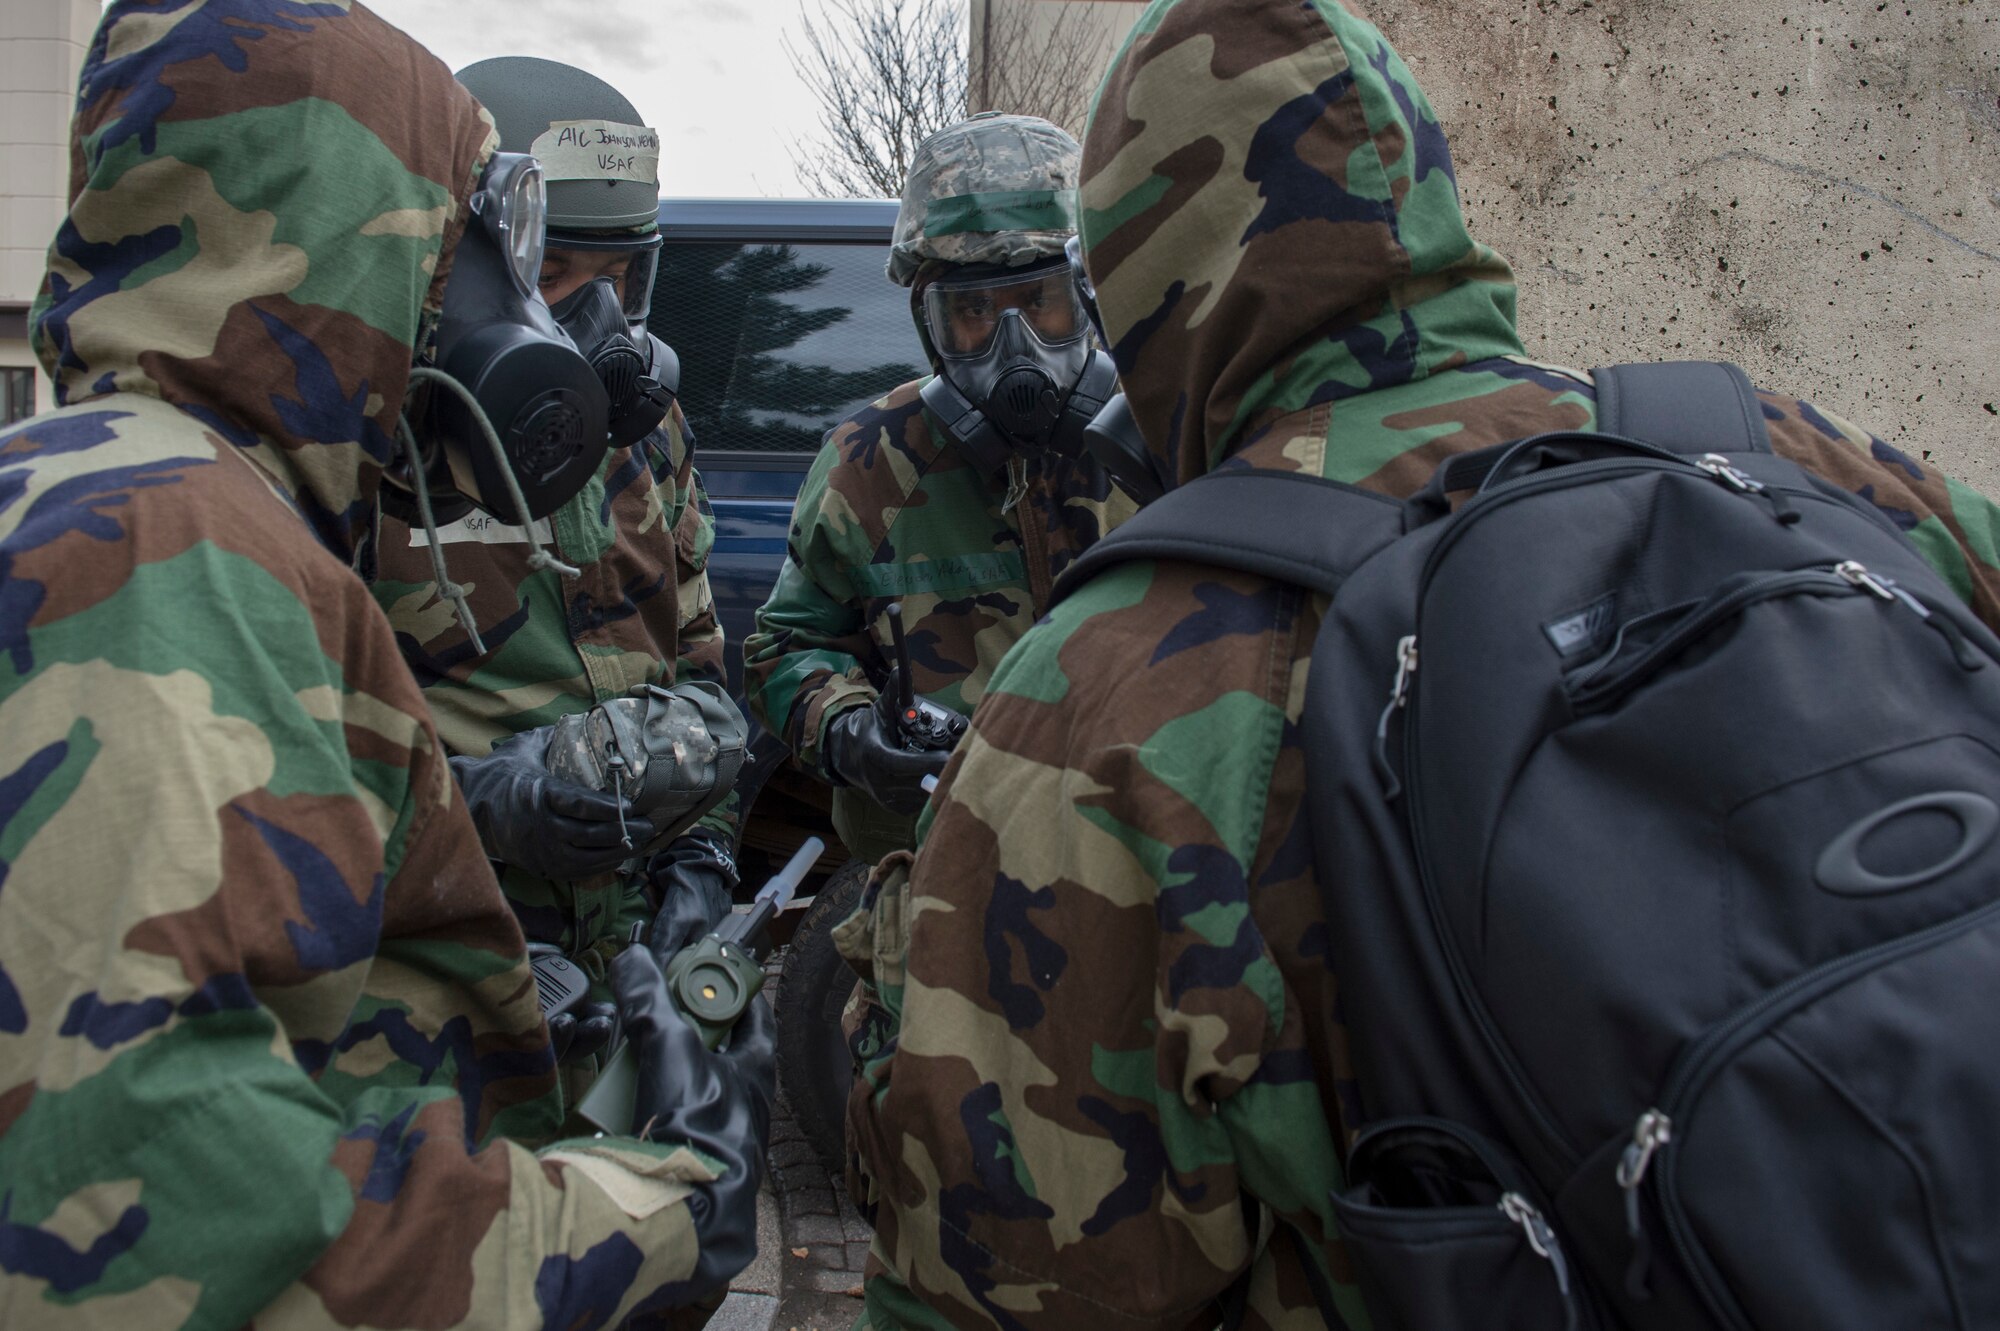 A post-attack reconnaissance team prepares to test simulated air contaminates after a mock explosion at Spangdahlem Air Base, Germany, March 15, 2018. The team completed a PAR sweep of a simulated chemical, biological, radiological, nuclear attack area during a base-wide exercise to test combat readiness. (U.S. Air Force photo by Senior Airman Dawn M. Weber)